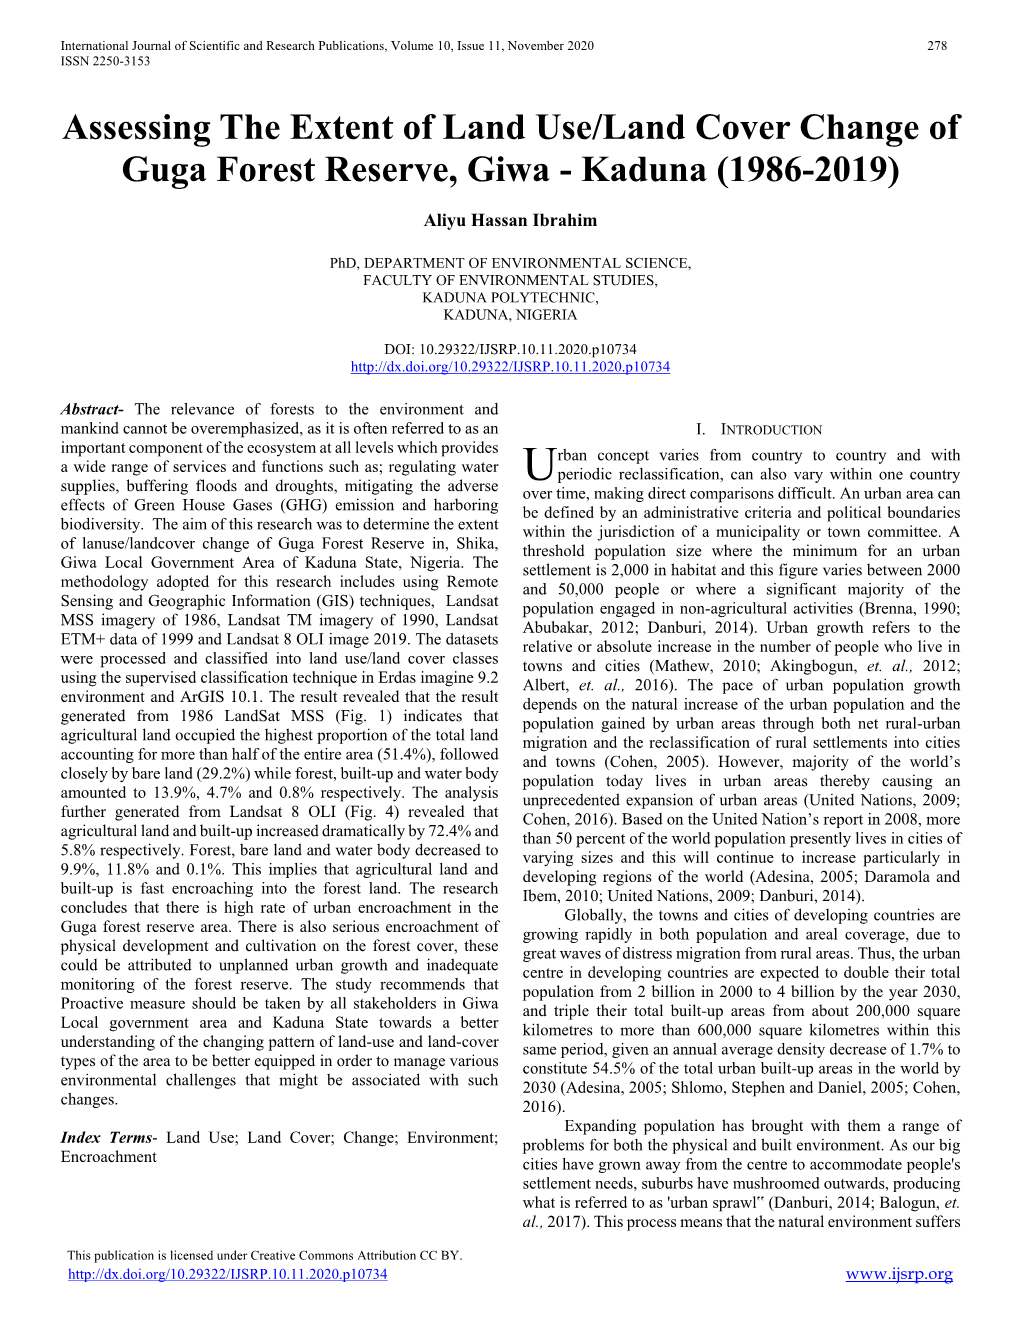 Assessing the Extent of Land Use/Land Cover Change of Guga Forest Reserve, Giwa - Kaduna (1986-2019)